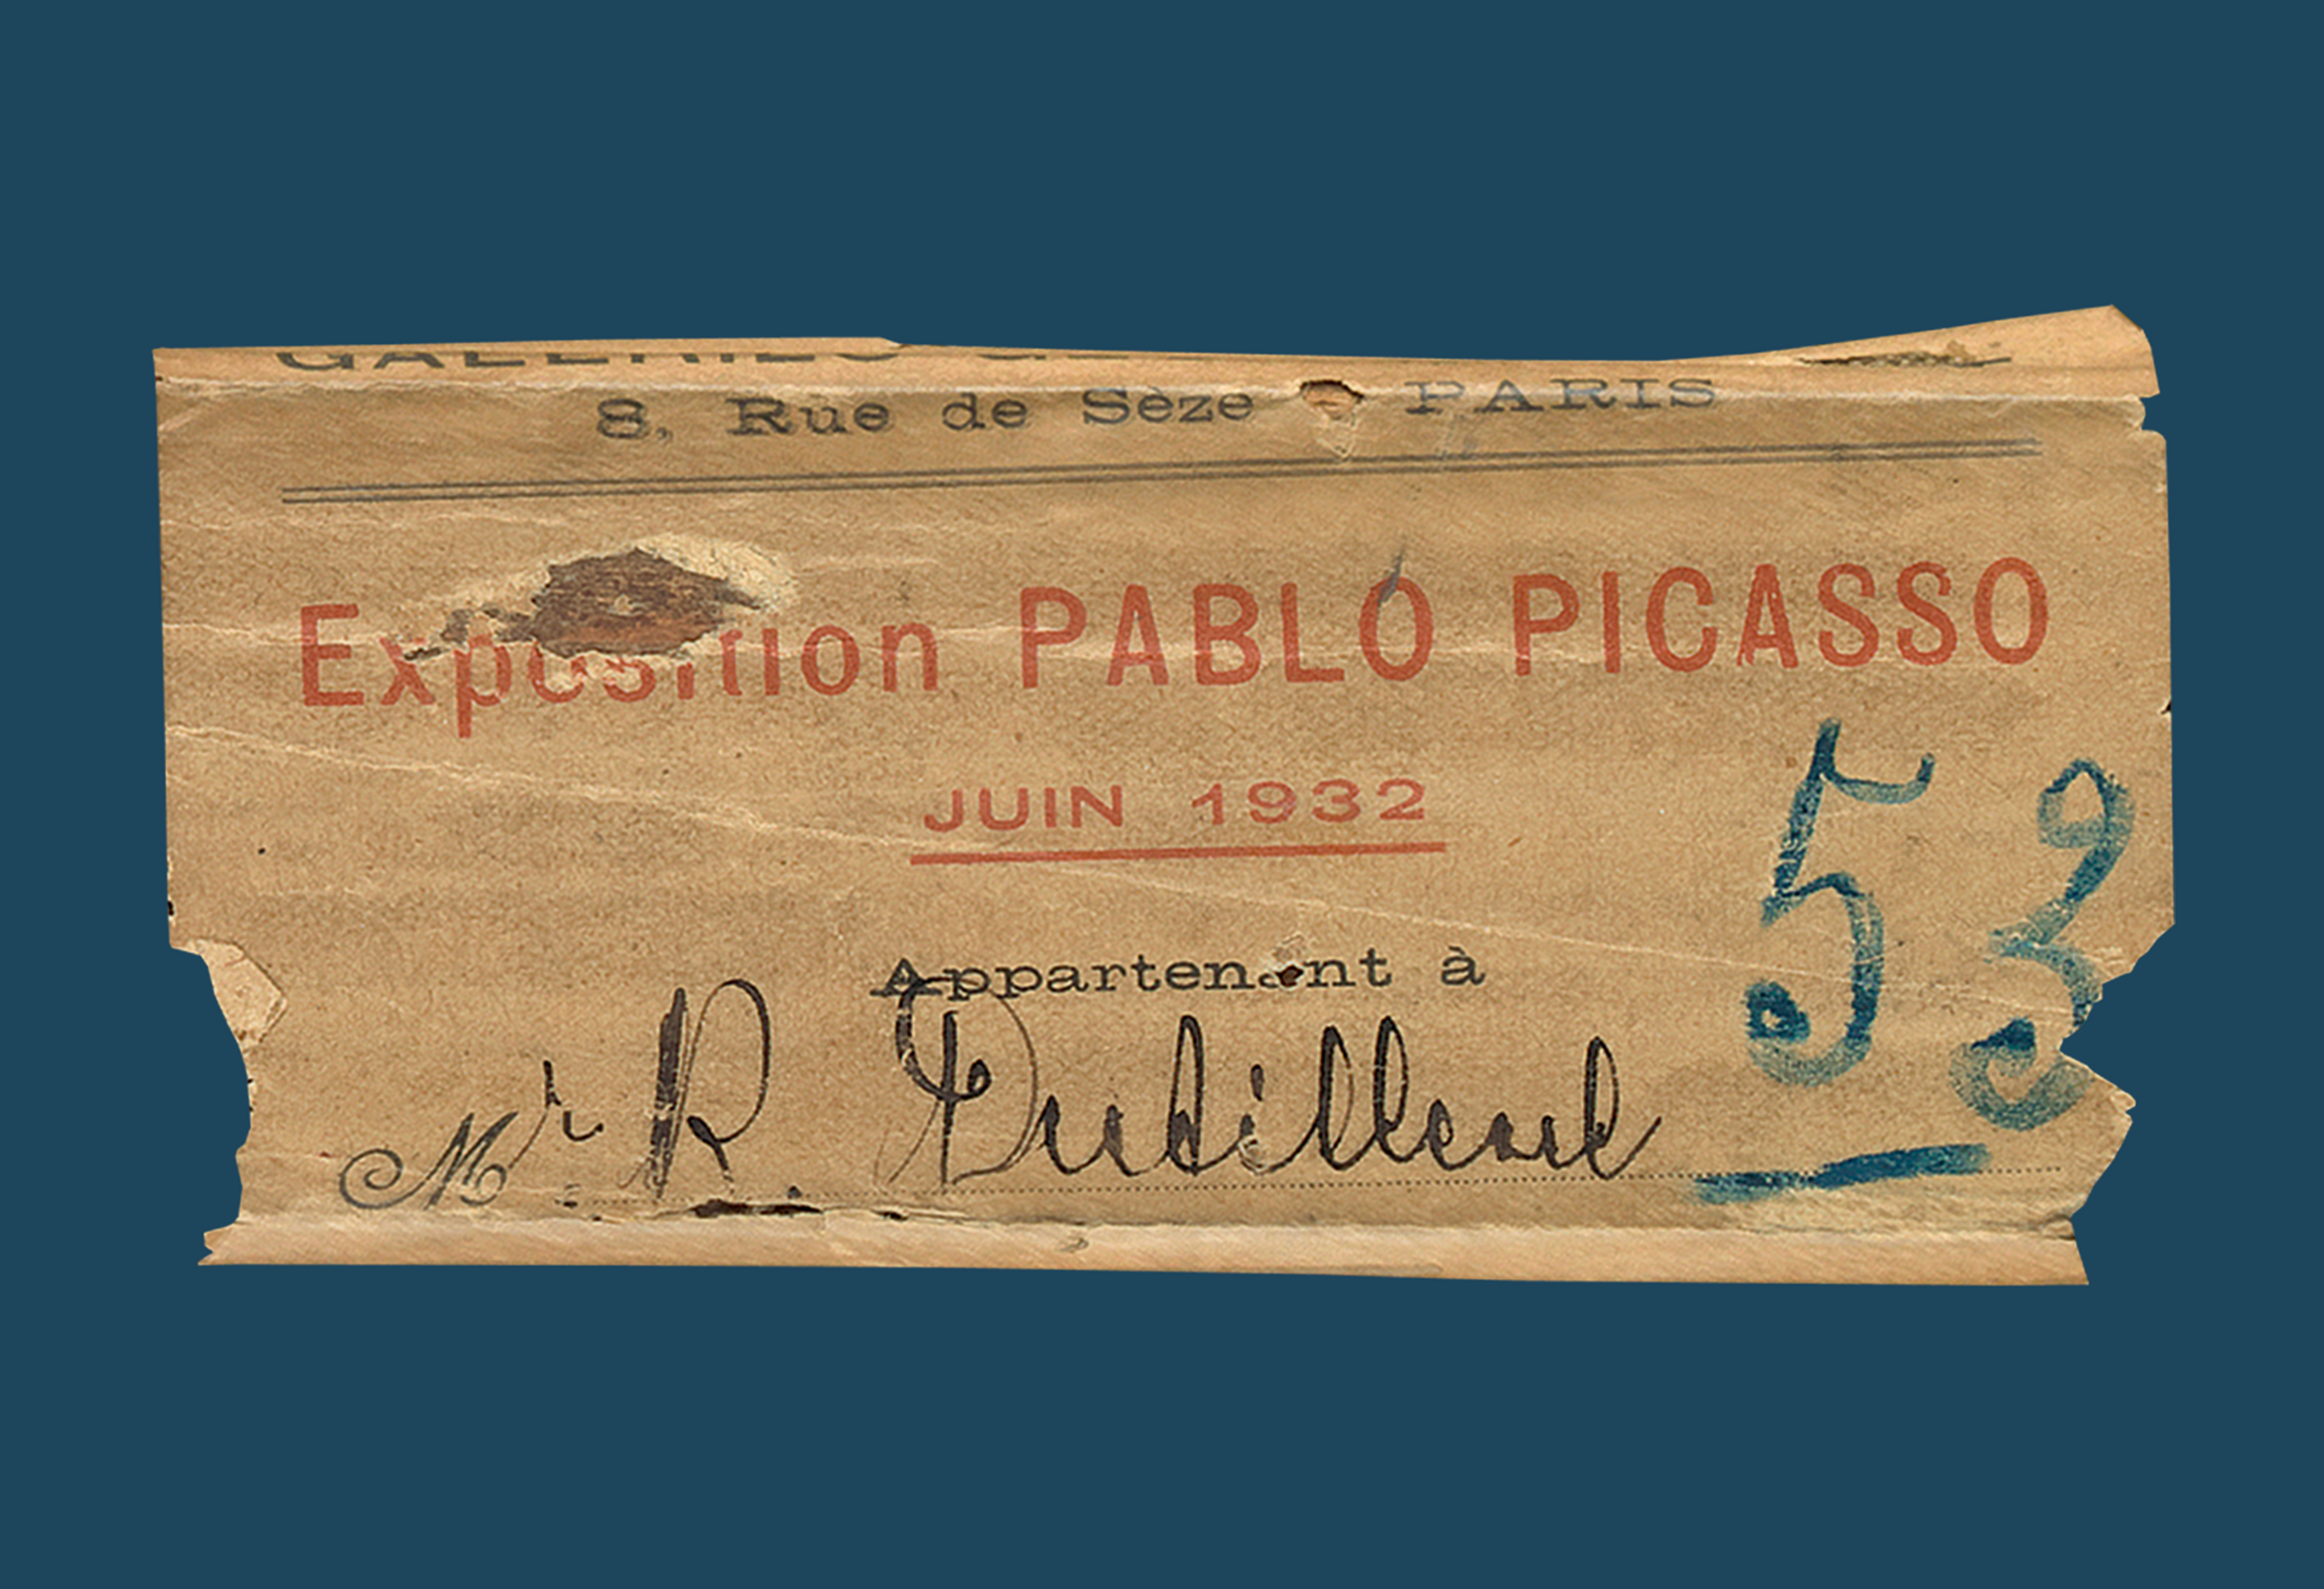 Torn label with "Exposition Pablo Picasso" typed in red and 53 written in blue on a blue background